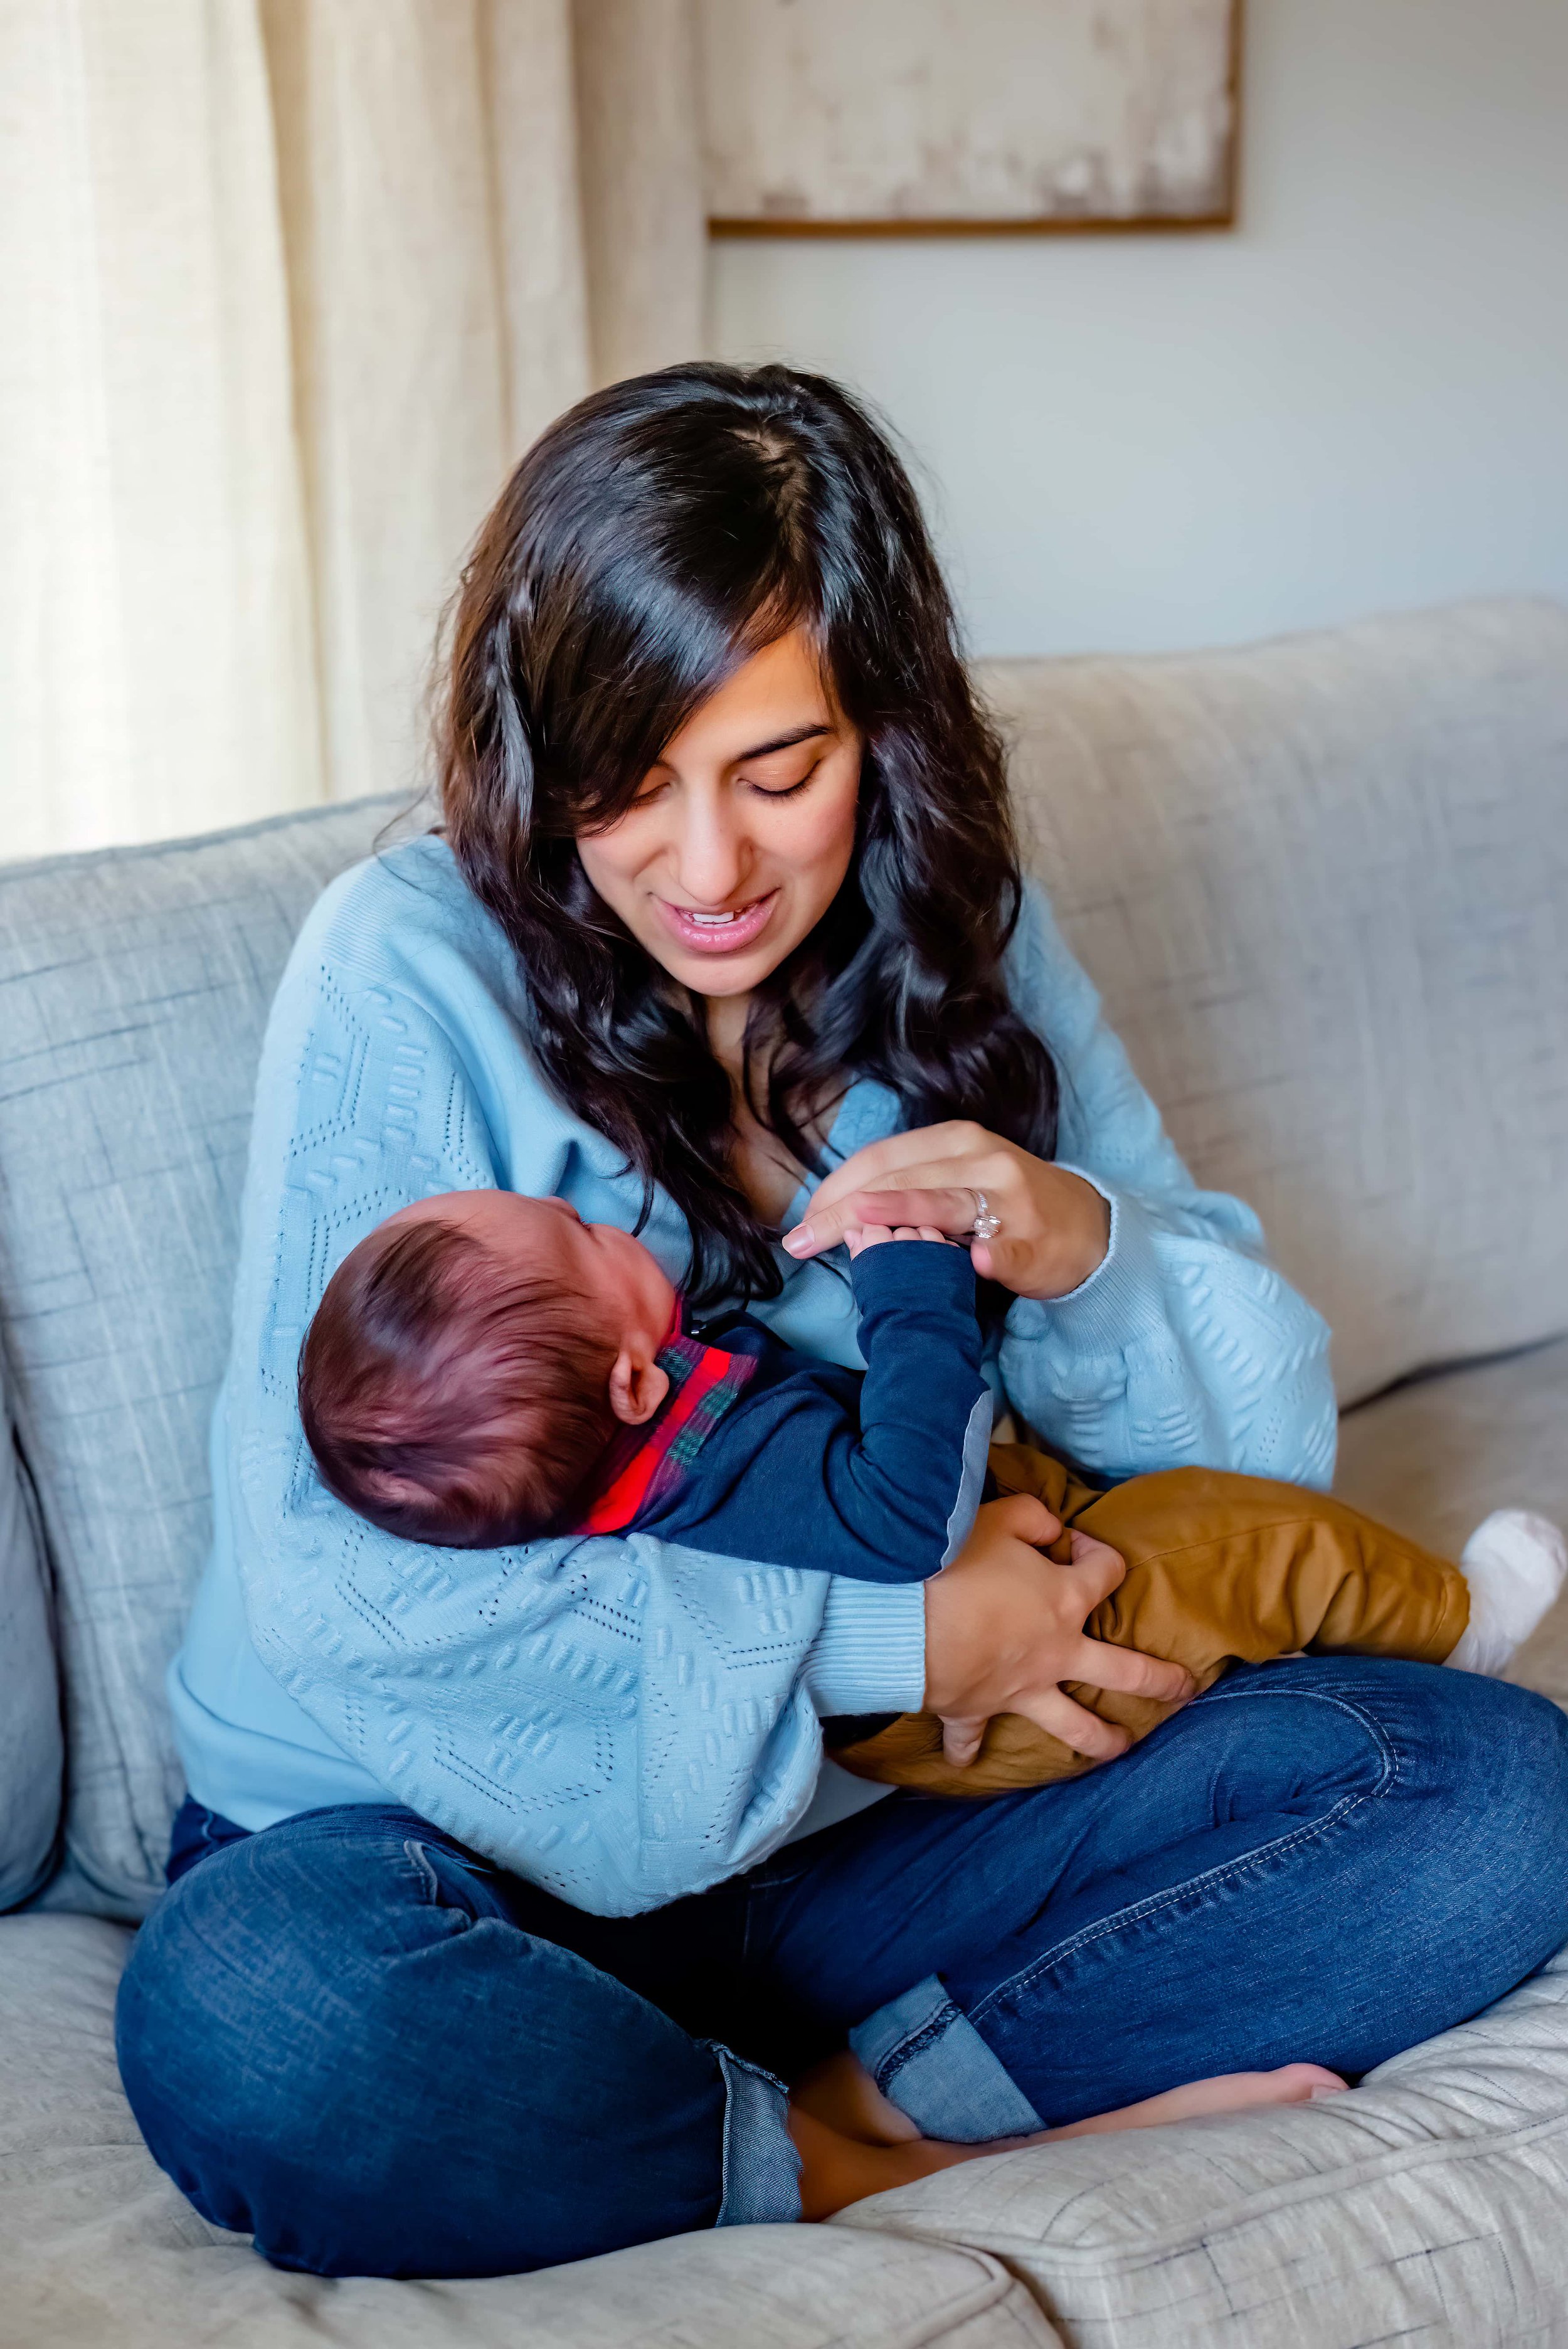 Newborn photograph with mom cradling baby and playing with his hand